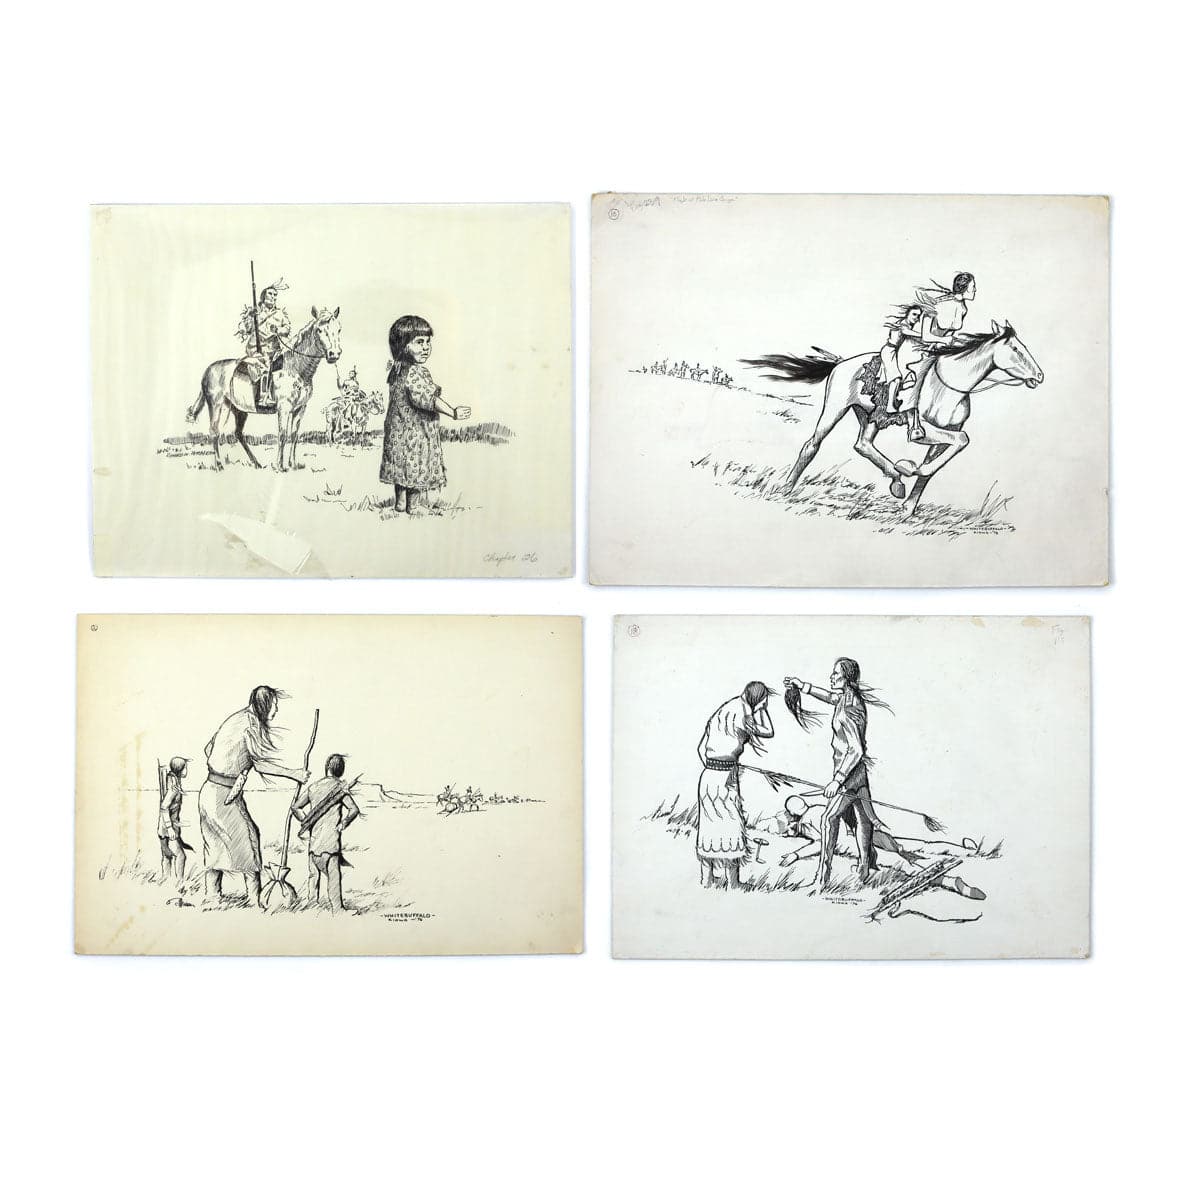 Group of 56 Original Kiowa Drawings, 120 Anko Calendar Drawings, and 13 Vinyl Records of Songs Arranged and Sung by Various Singers of the Southern and Northern Plains Tribes (M90218C-0621-001)11